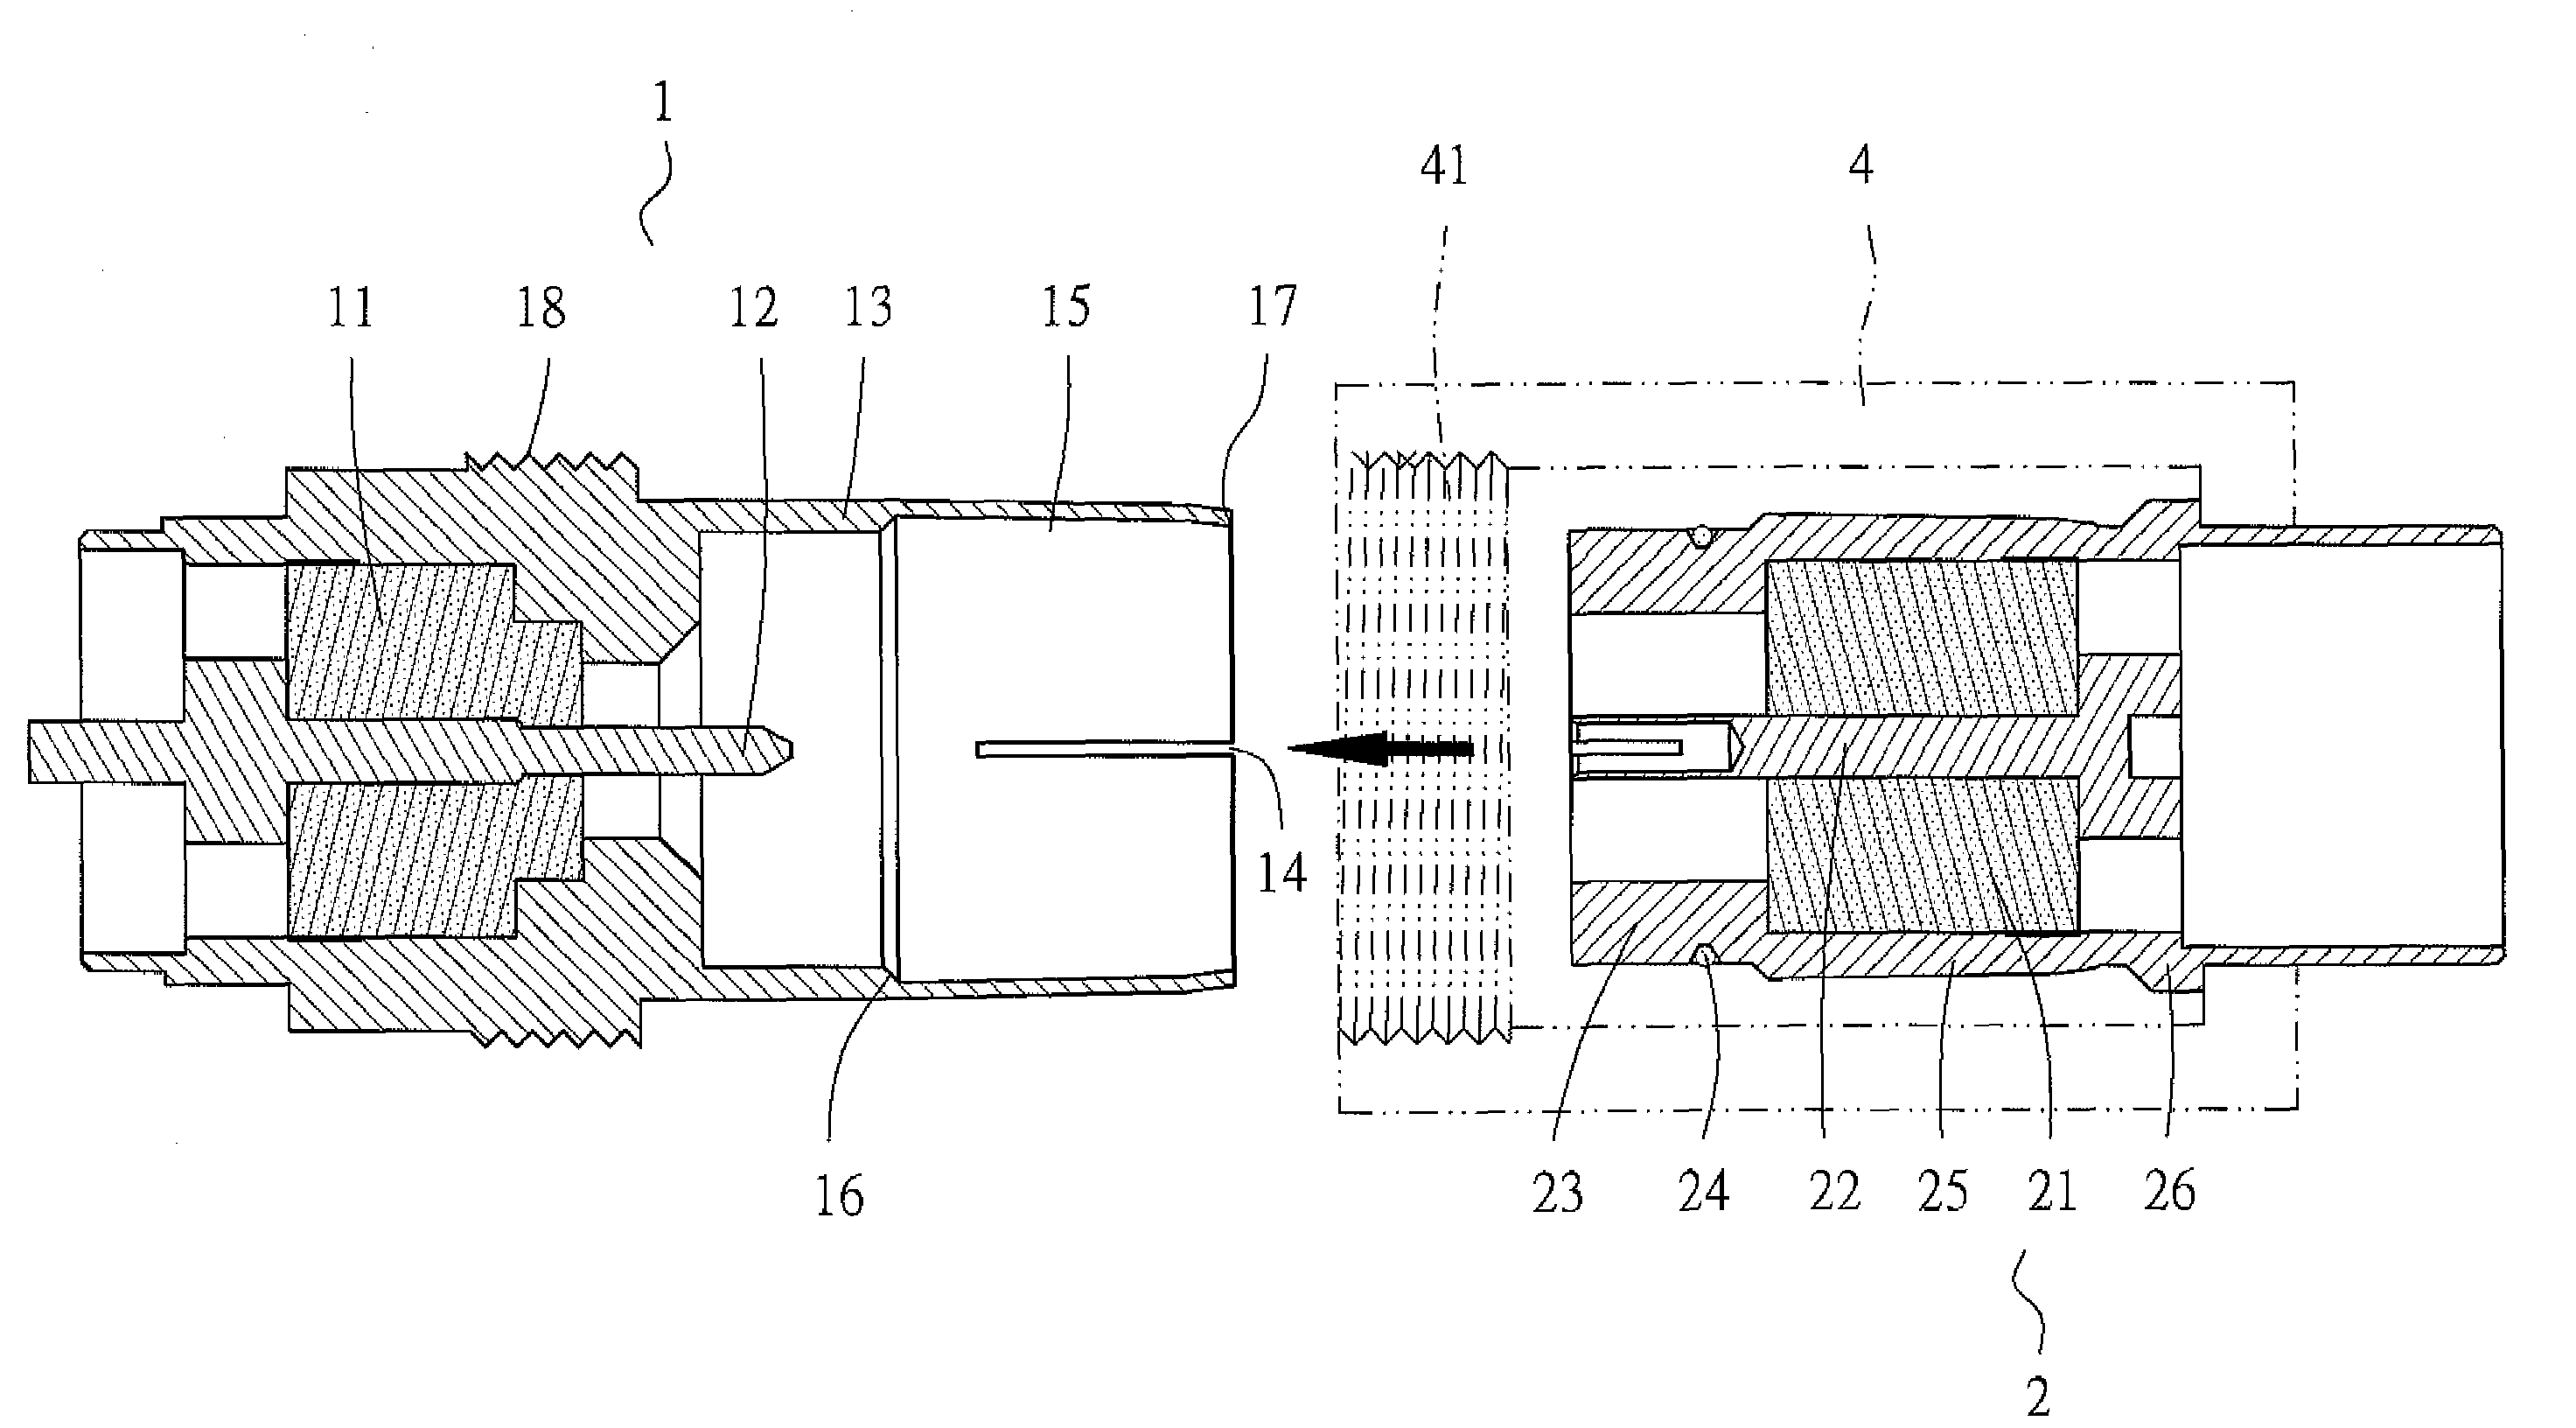 High-frequency connector assembly